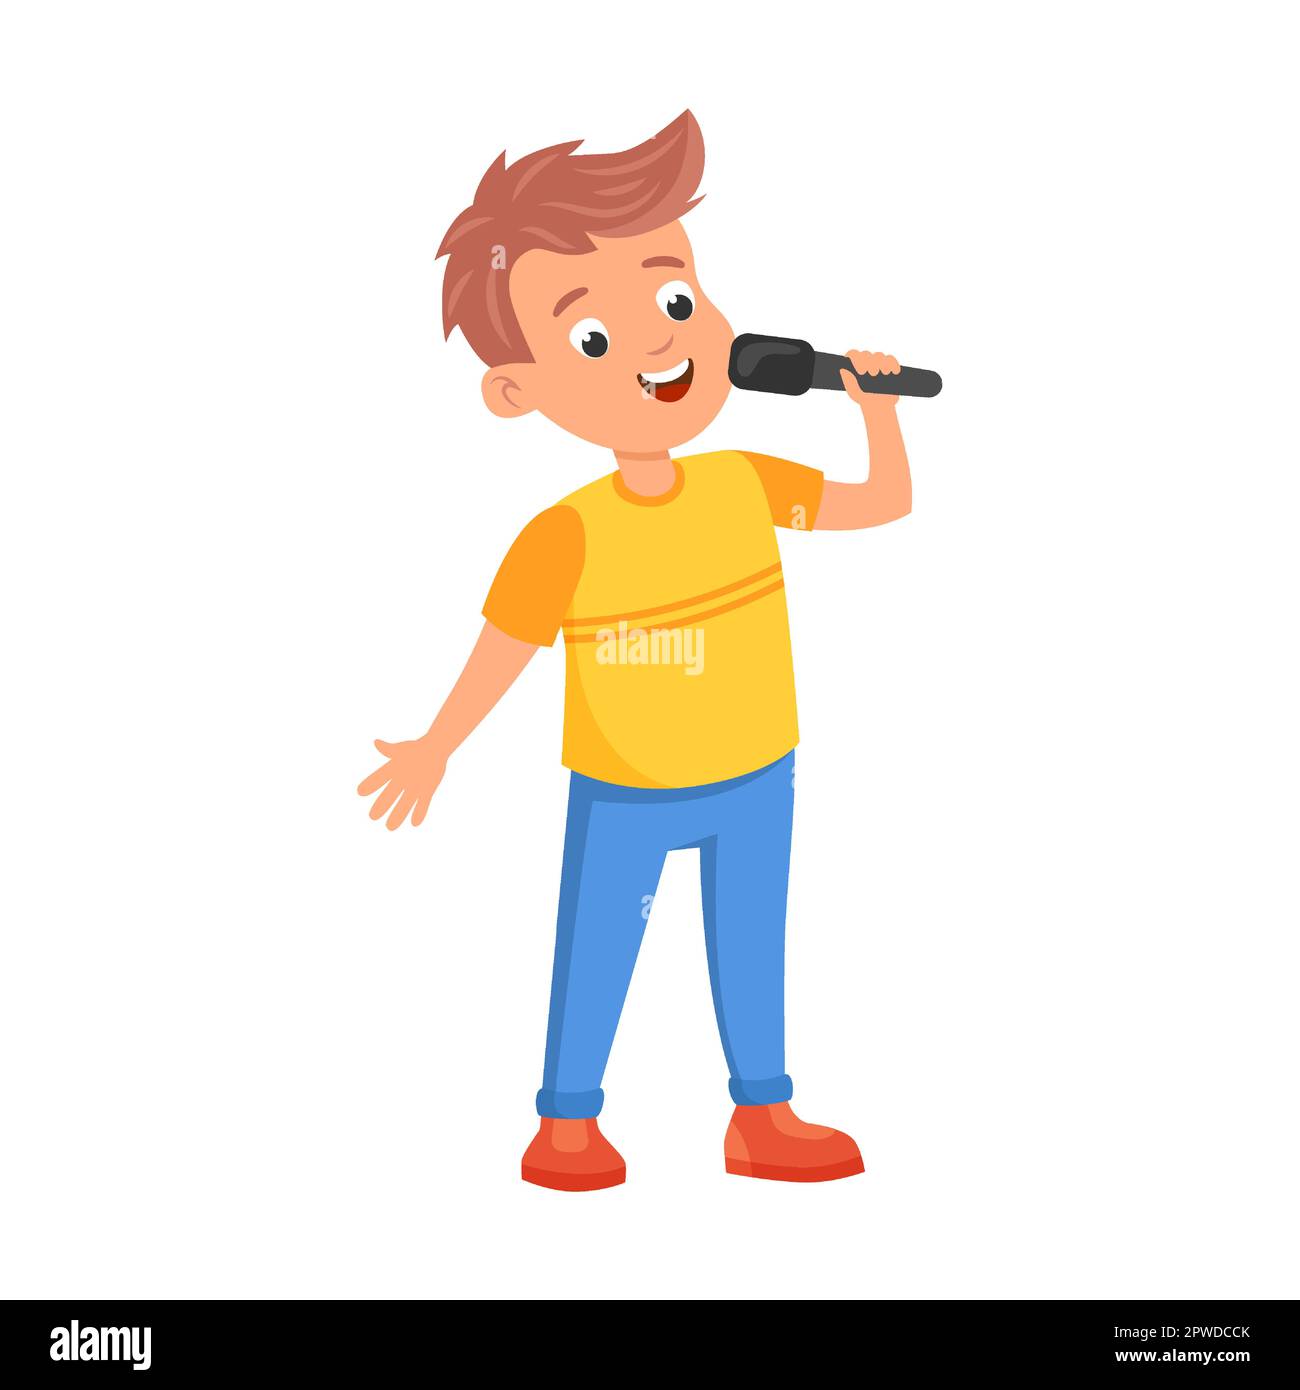 cartoon singer with microphone